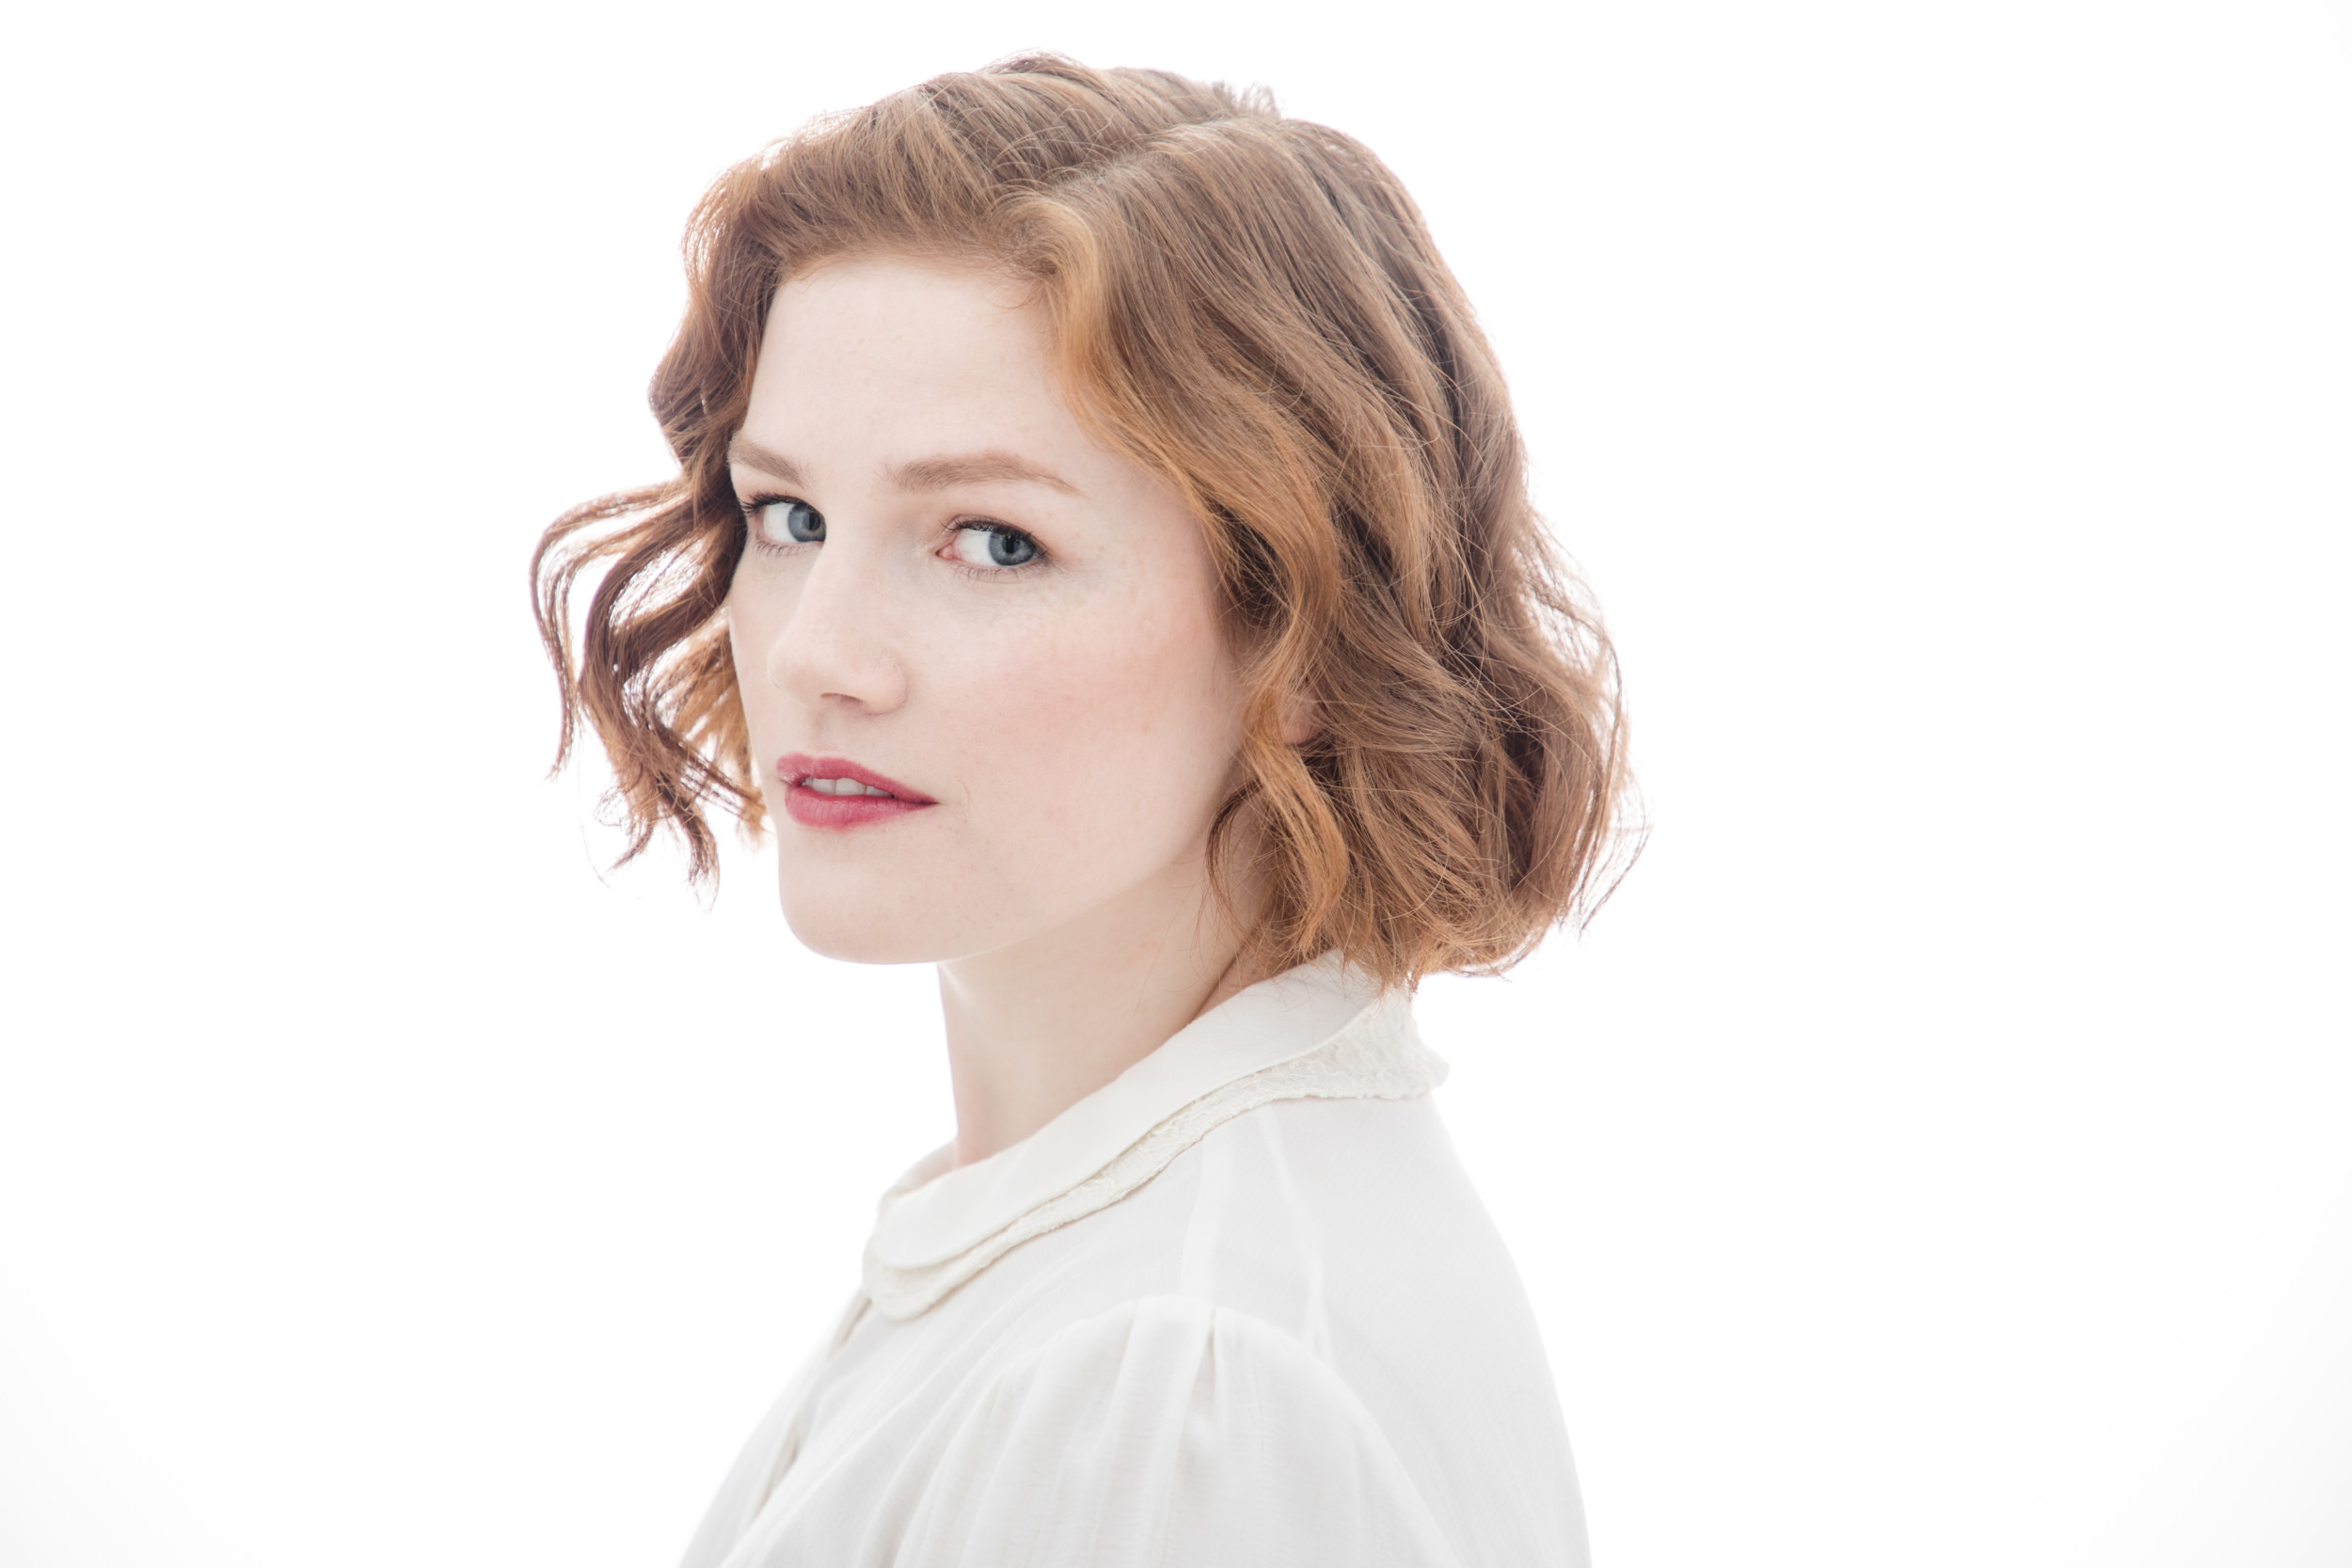 A person with short, wavy red hair and light skin looks over their shoulder, wearing a white shirt against a plain white background, captured perfectly by a renowned New York headshot photographer.